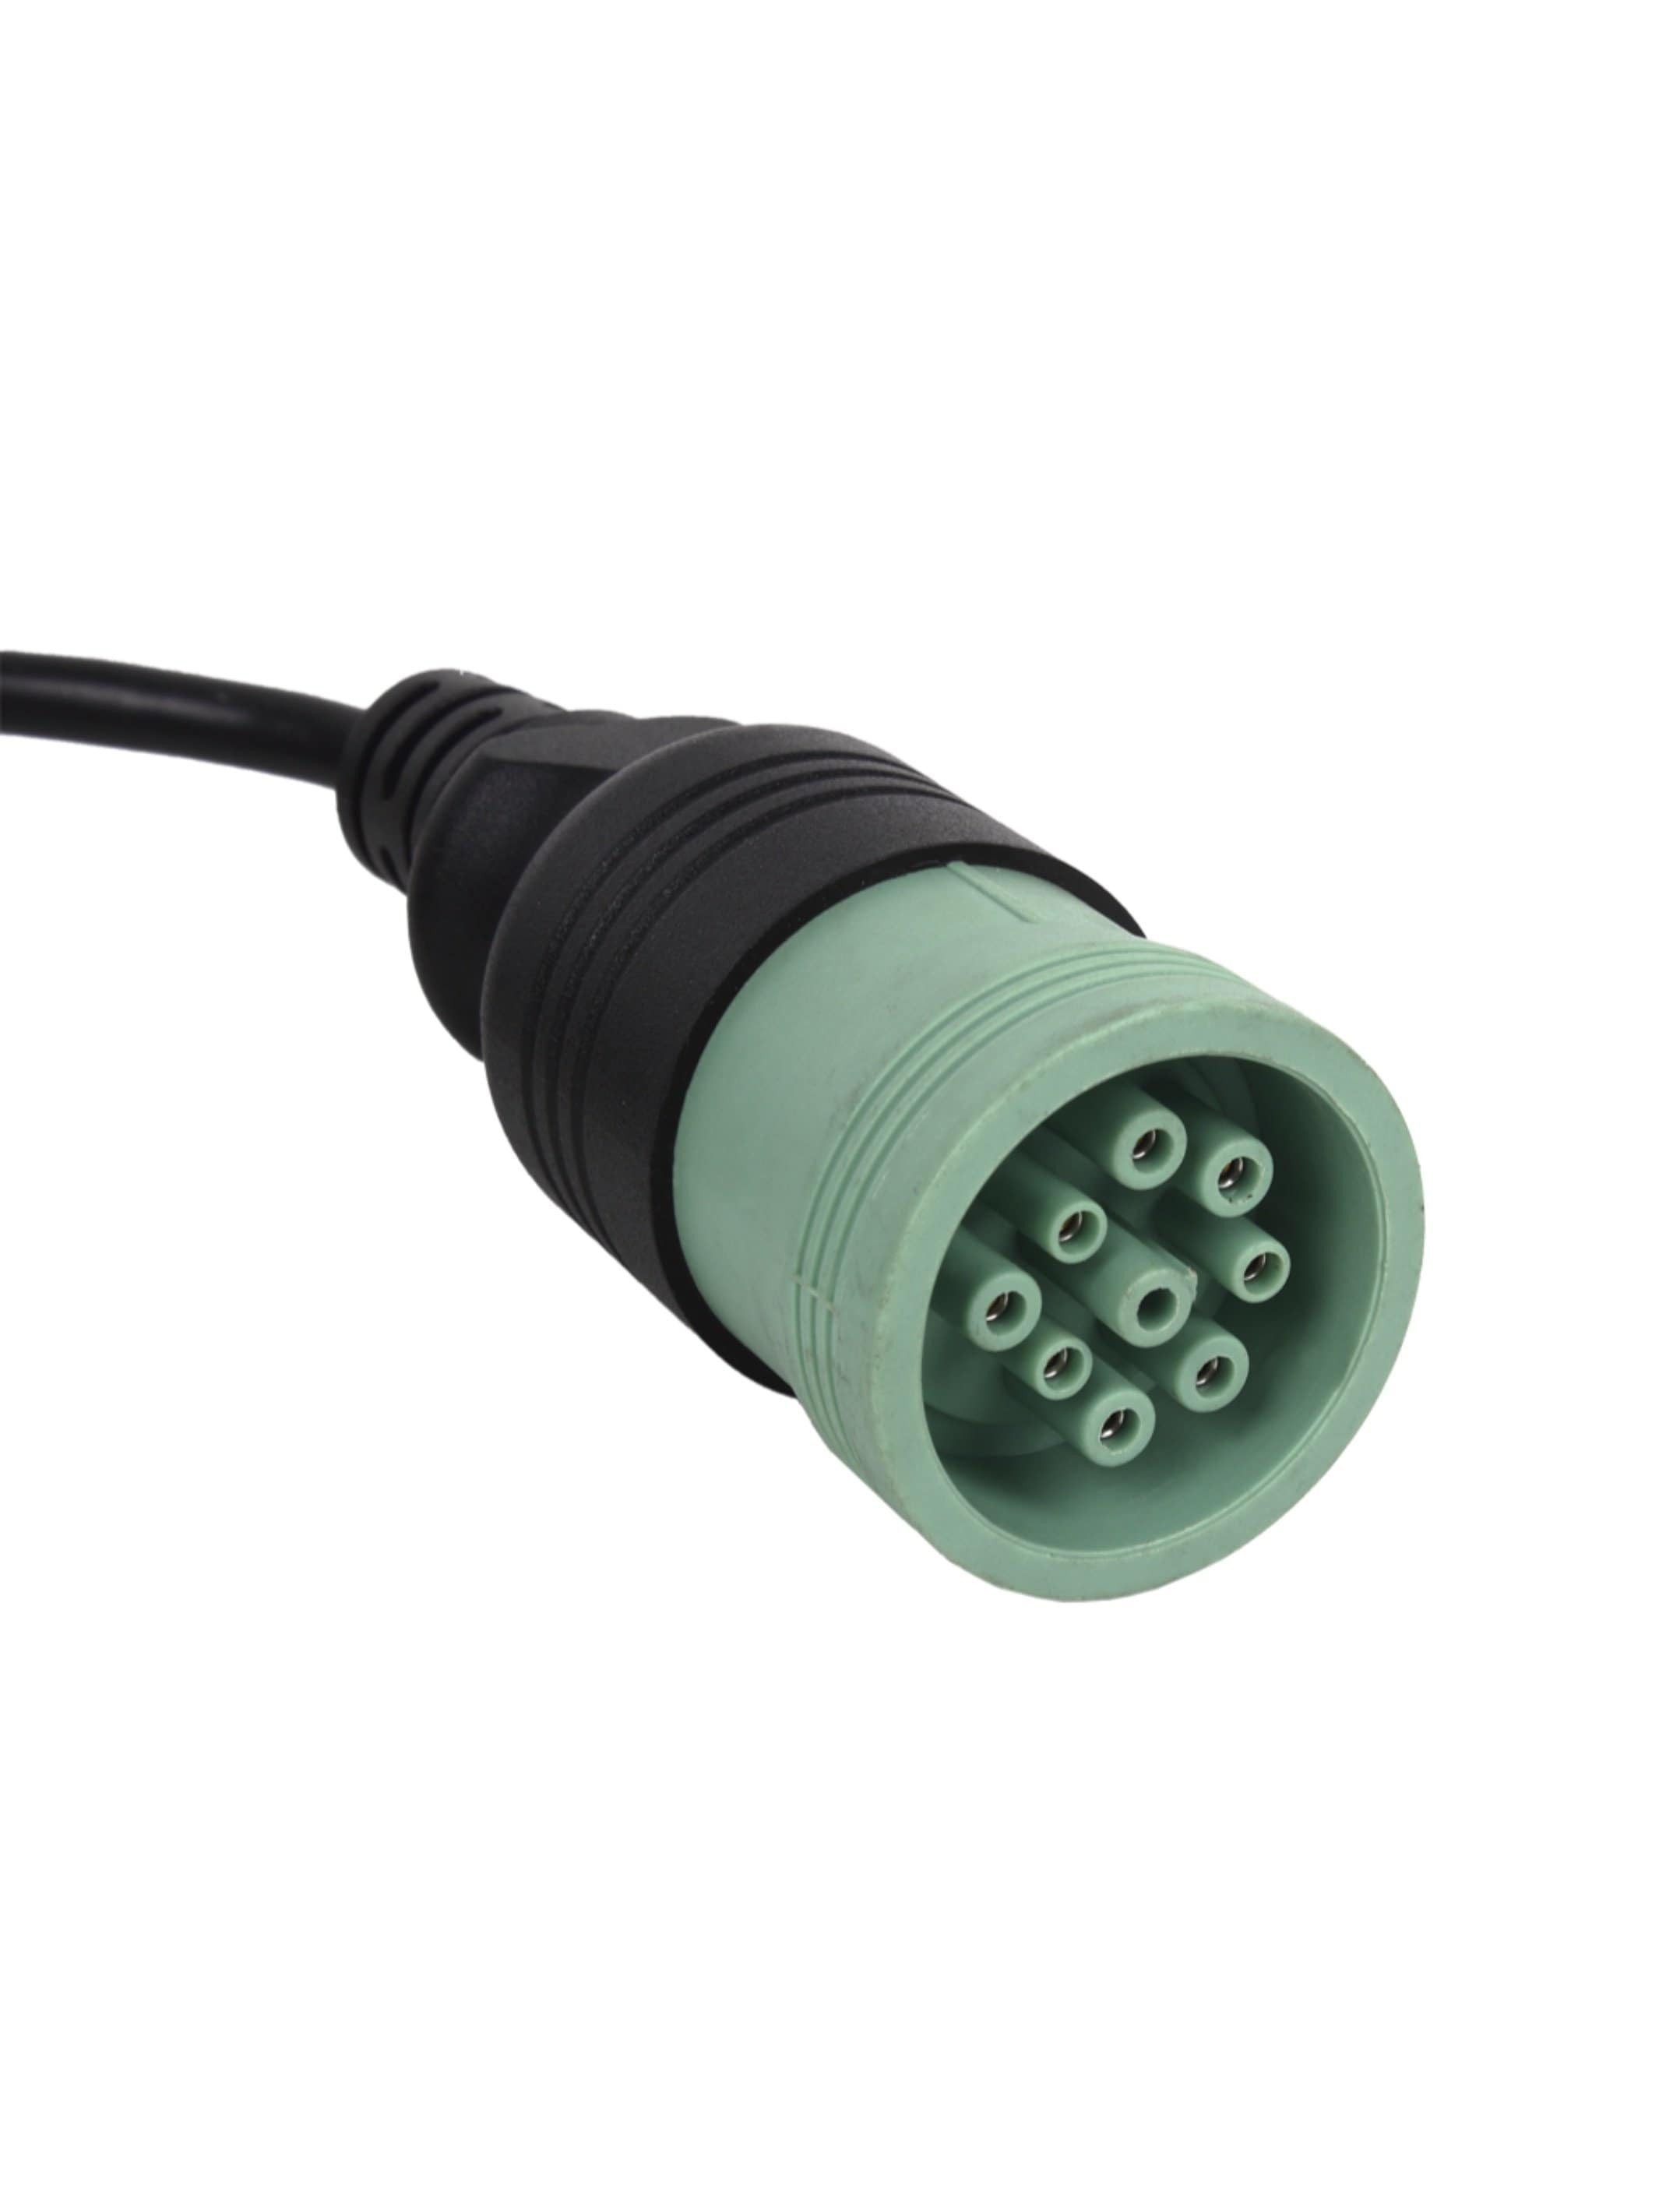 JDC217.9 Deutsch 9 Pin Type 2 Green Diagnostics Cable - Jaltest Agricultural, Construction, Heavy Equipment MH & Power Systems Diagnostic Tool